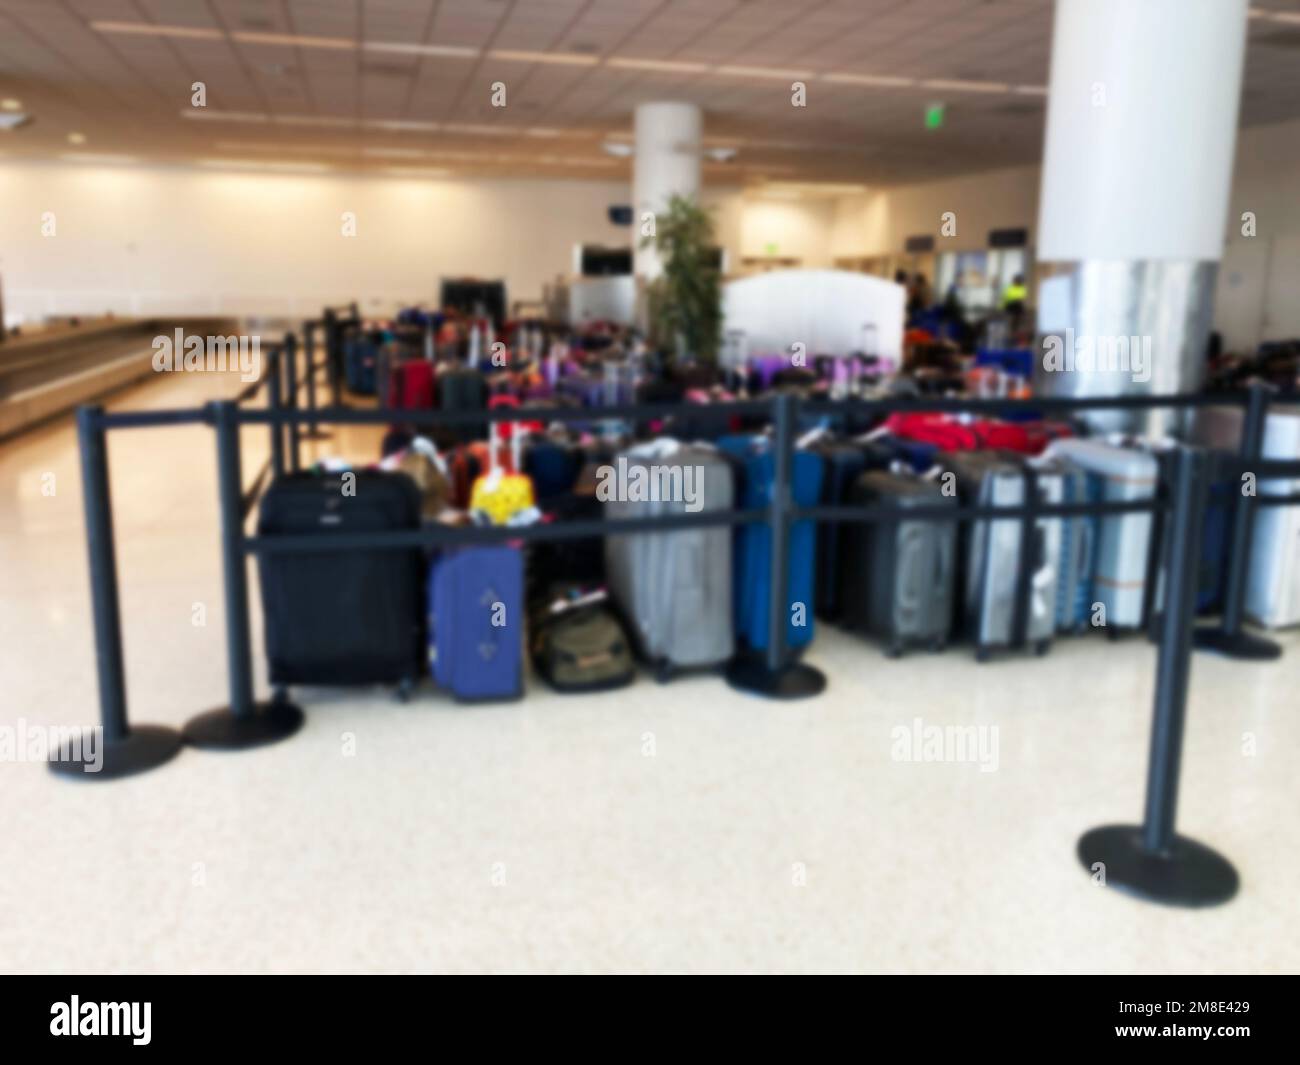 Unclaimed luggage is piling up at the airport arrival terminal due to canceled or delayed flights Abstract blur Stock Photo